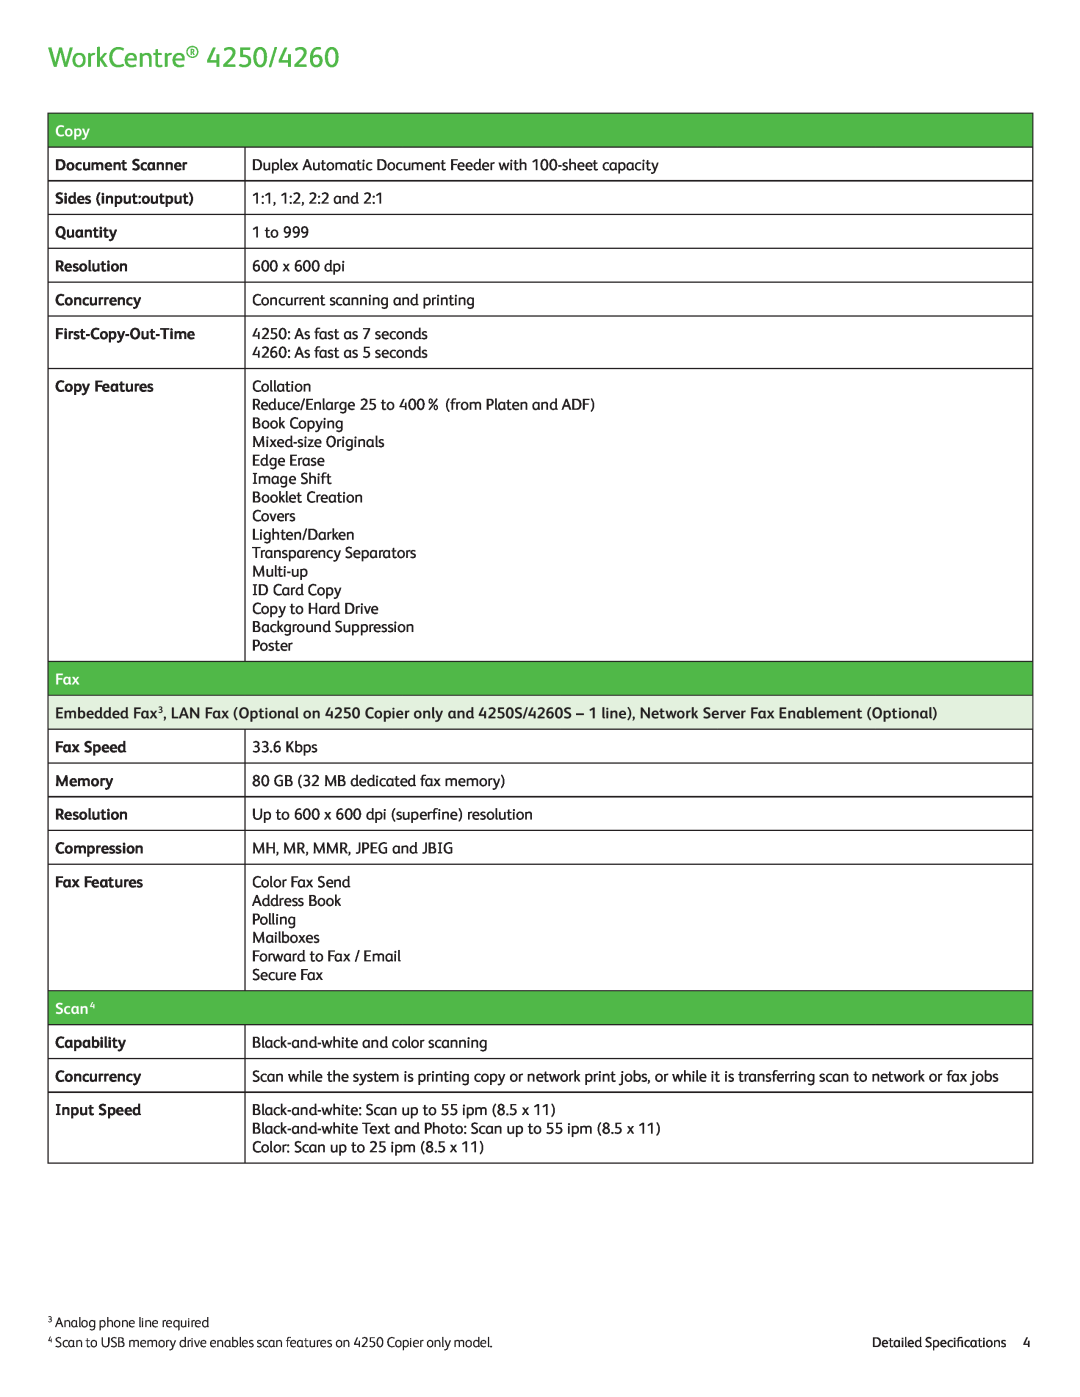 Xerox specifications Copy, Scan4, WorkCentre 4250/4260, Document Scanner 